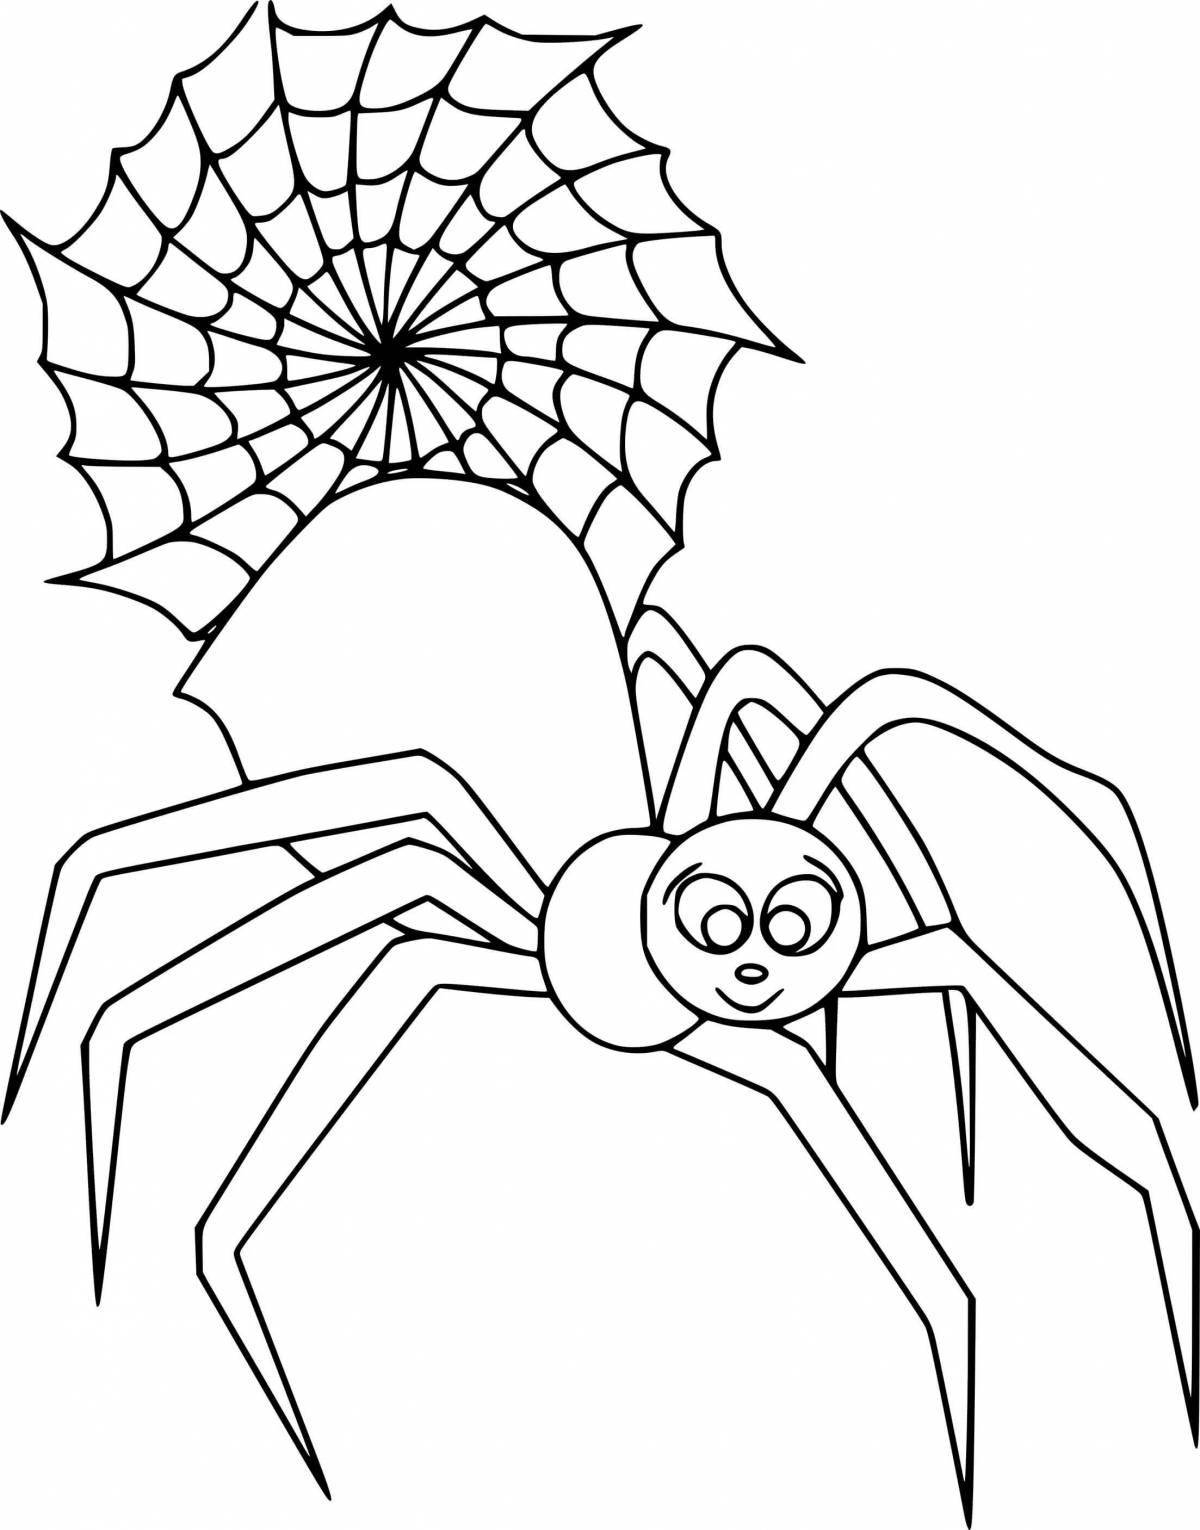 Fun drawing of a spider